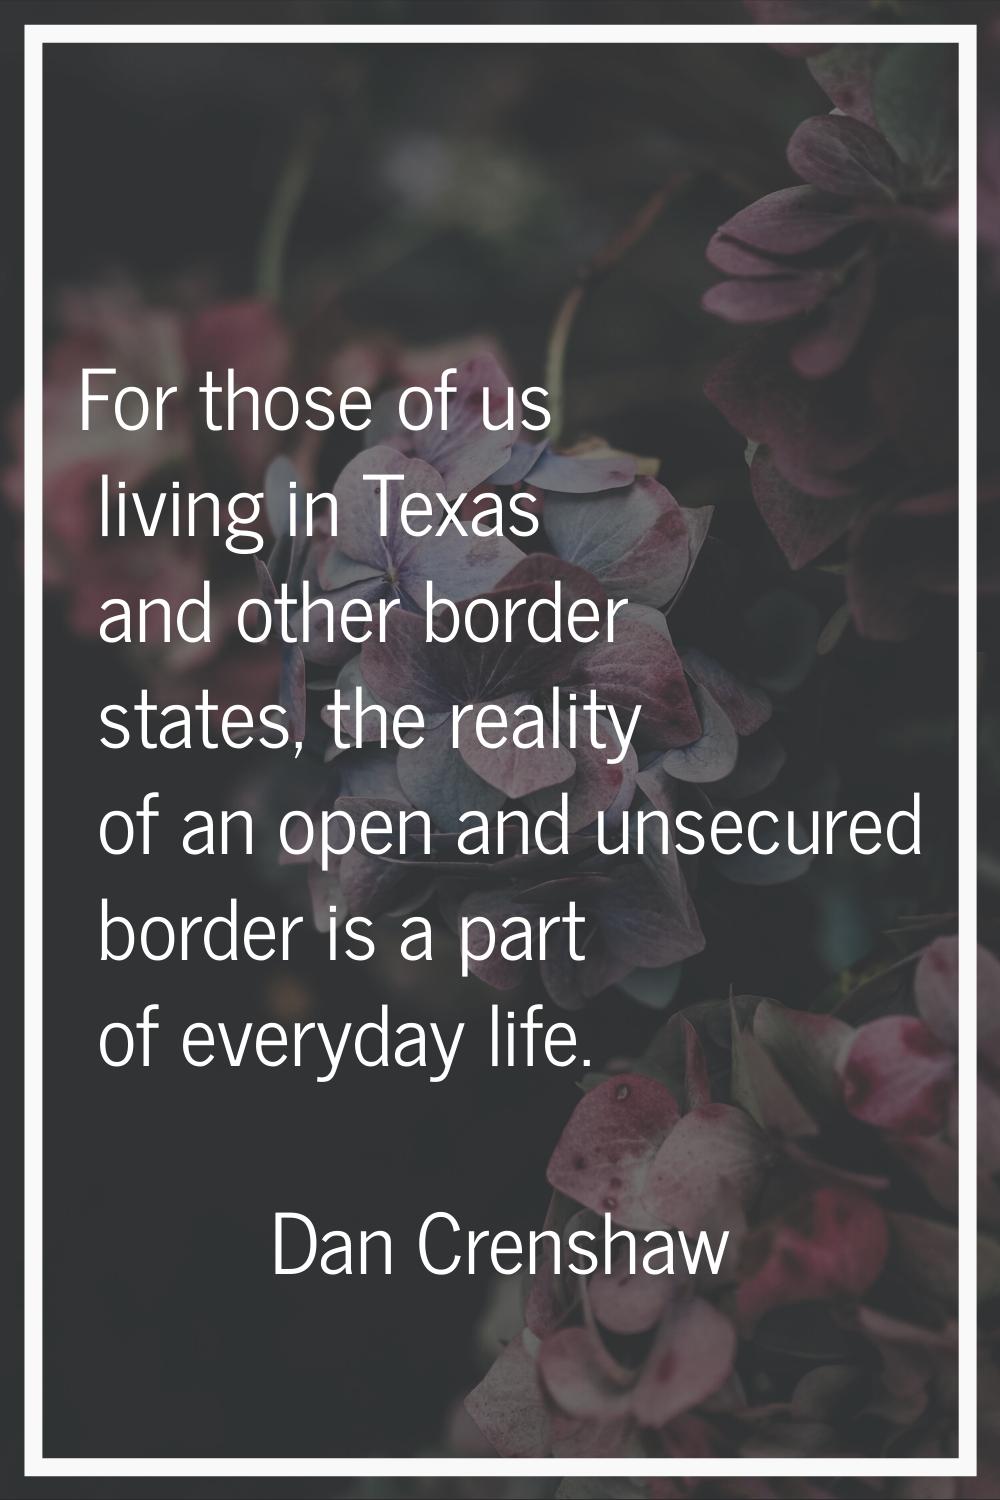 For those of us living in Texas and other border states, the reality of an open and unsecured borde